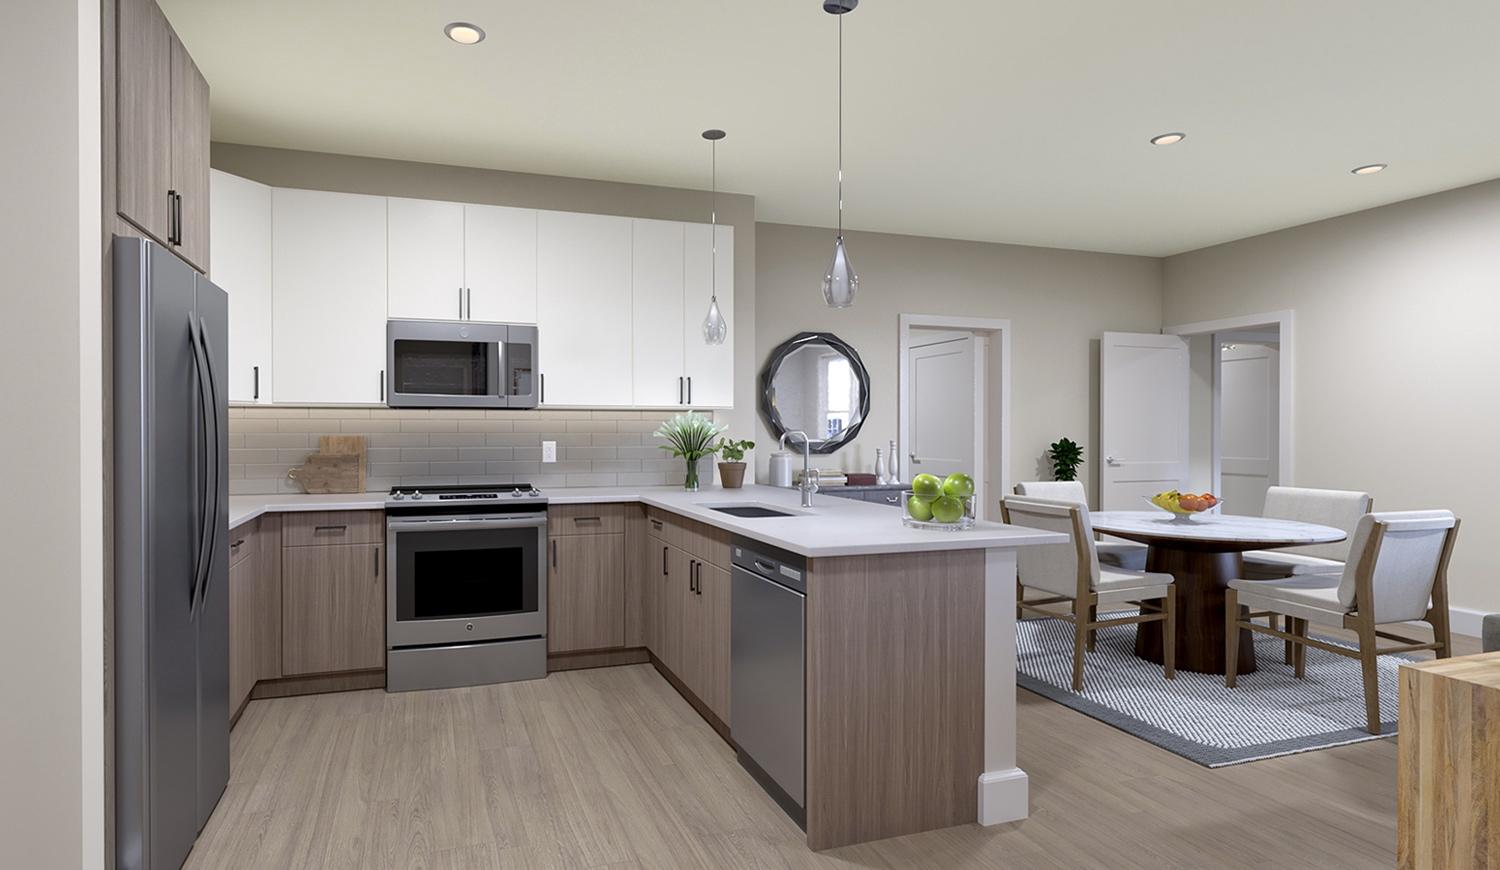 Atlee Square luxury apartment kitchen & dining room at Langhorne, PA, with modern appliances, table, chairs, & ample counter space.